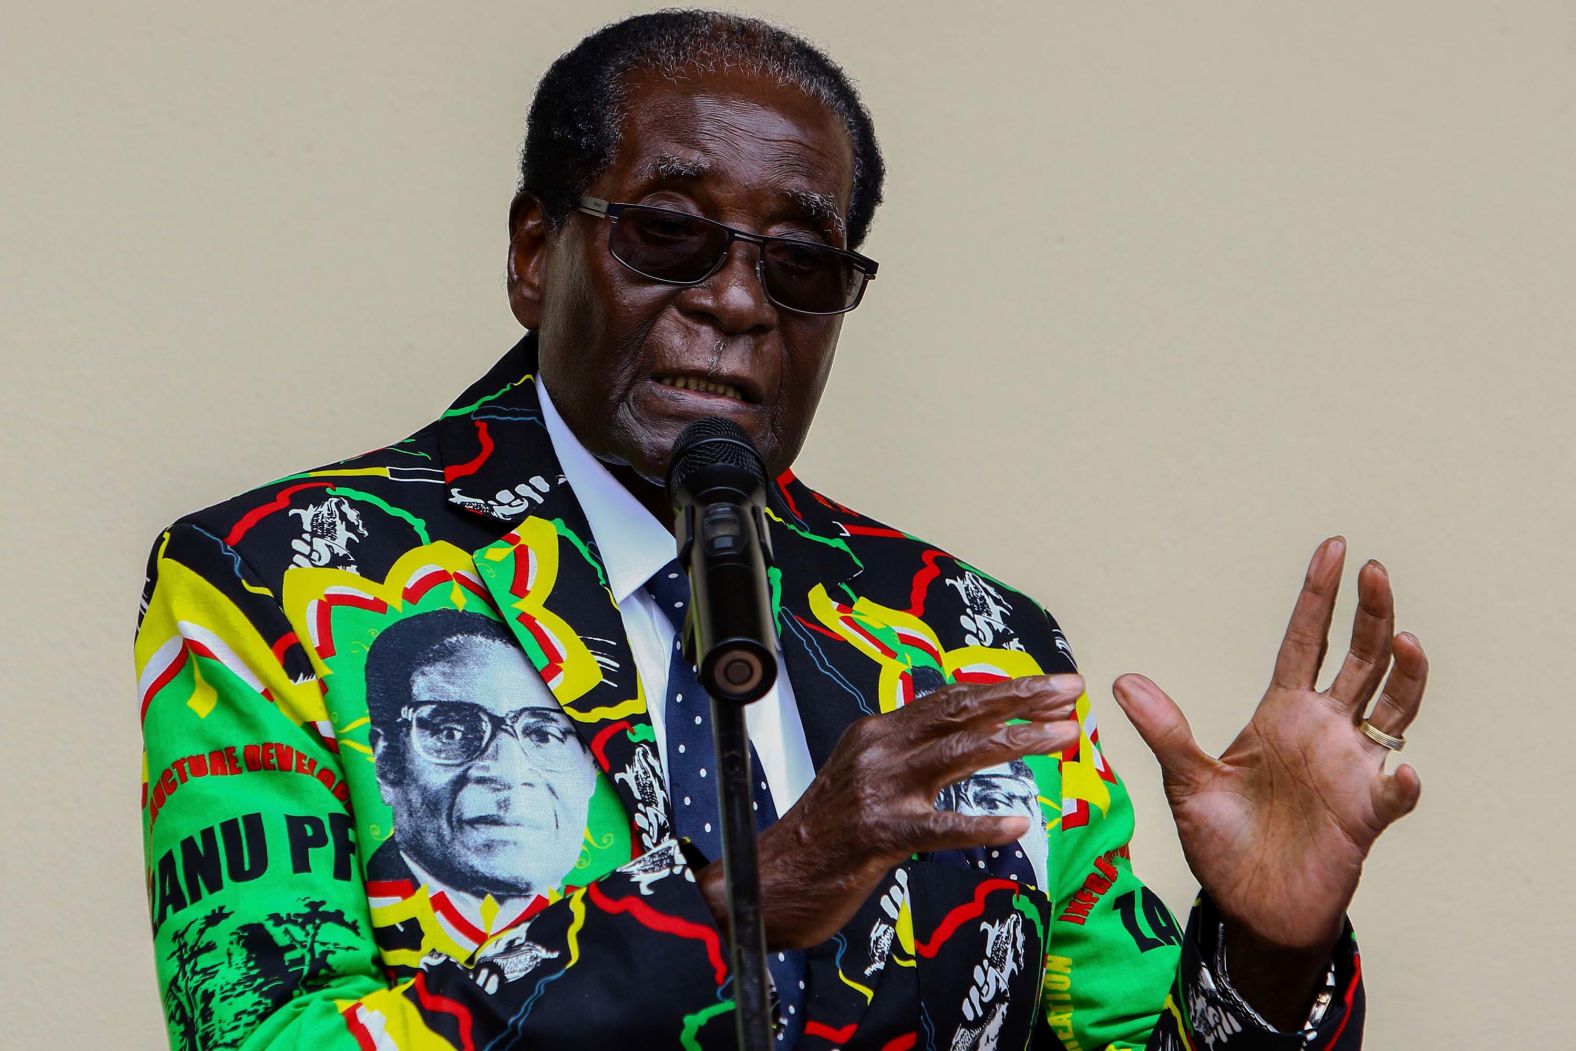 Mugabe speaks at the ZANU-PF party's annual conference in December 2016. The party endorsed Mugabe as its candidate for the 2018 election.